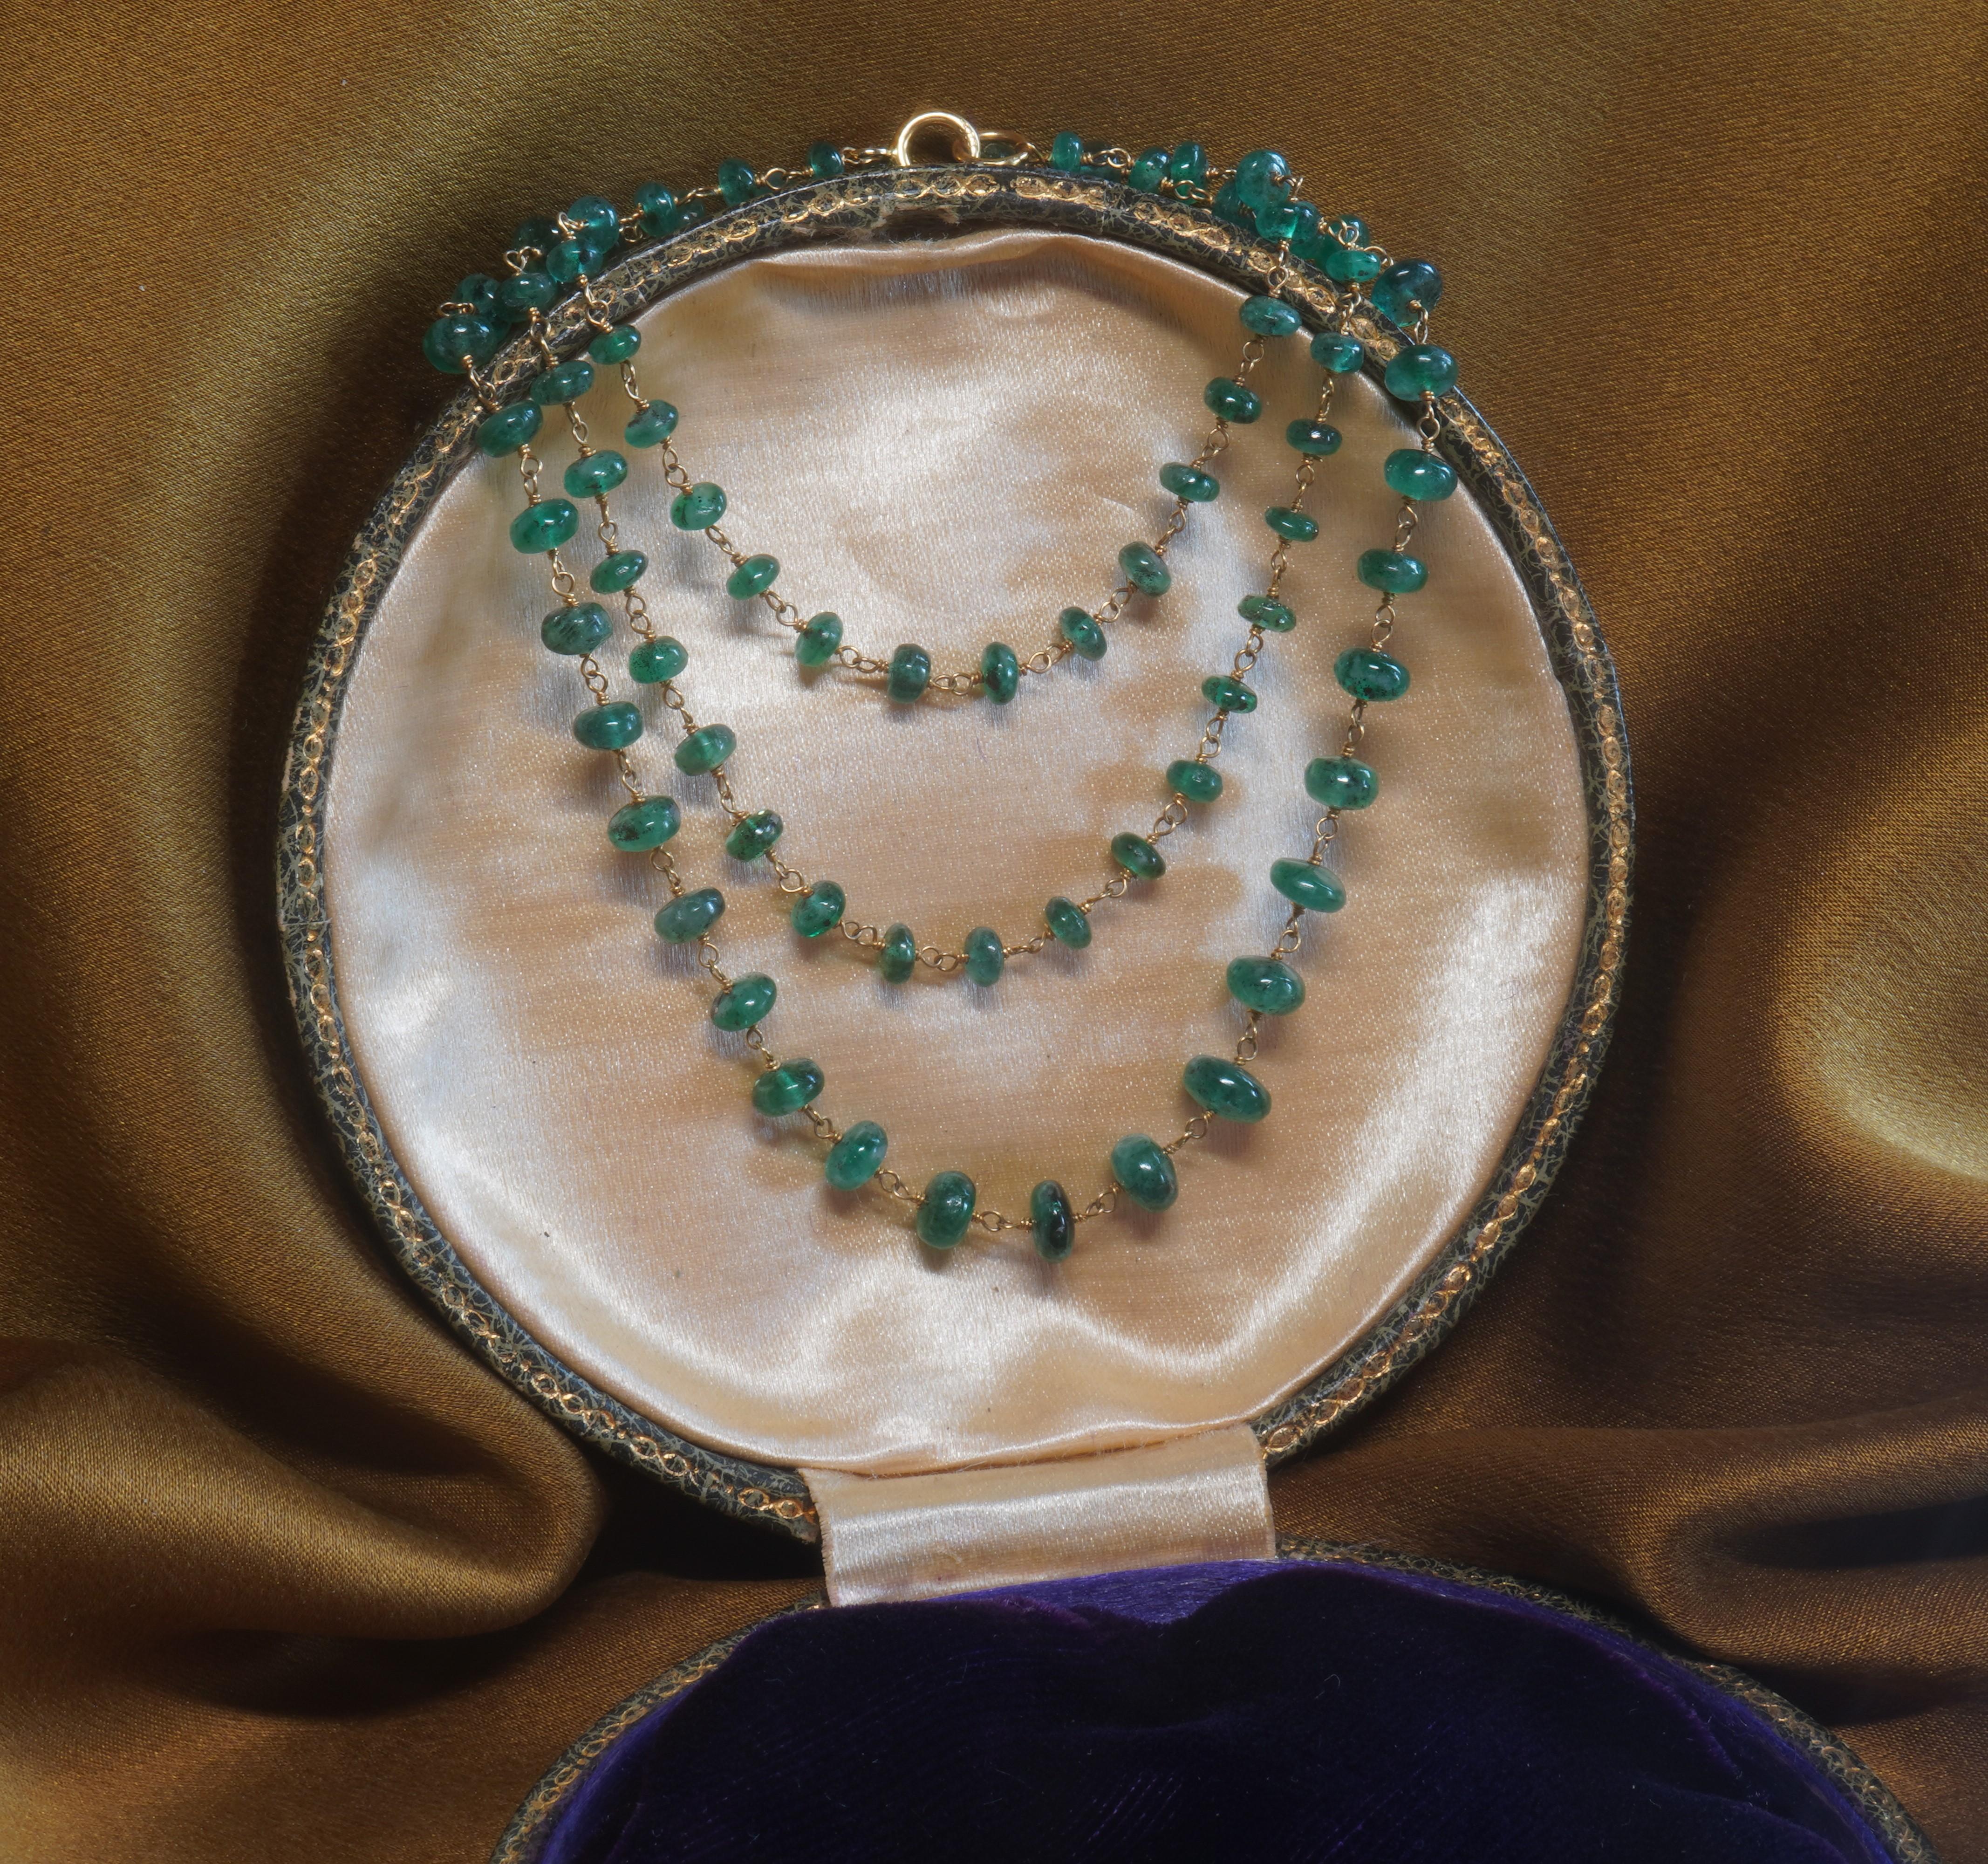 Old South Jewels proudly presents LUXURY.   GIA Certified GORGEOUS 18K GOLD 15.33 CARATS EMERALD NECKLACE AND BOX!   Vintage Natural Brazilian Emeralds--Stunning!  

BEAUTIFUL 18 INCHES LONG NECKLACE.  Very Classy. These Will Take You Anywhere.